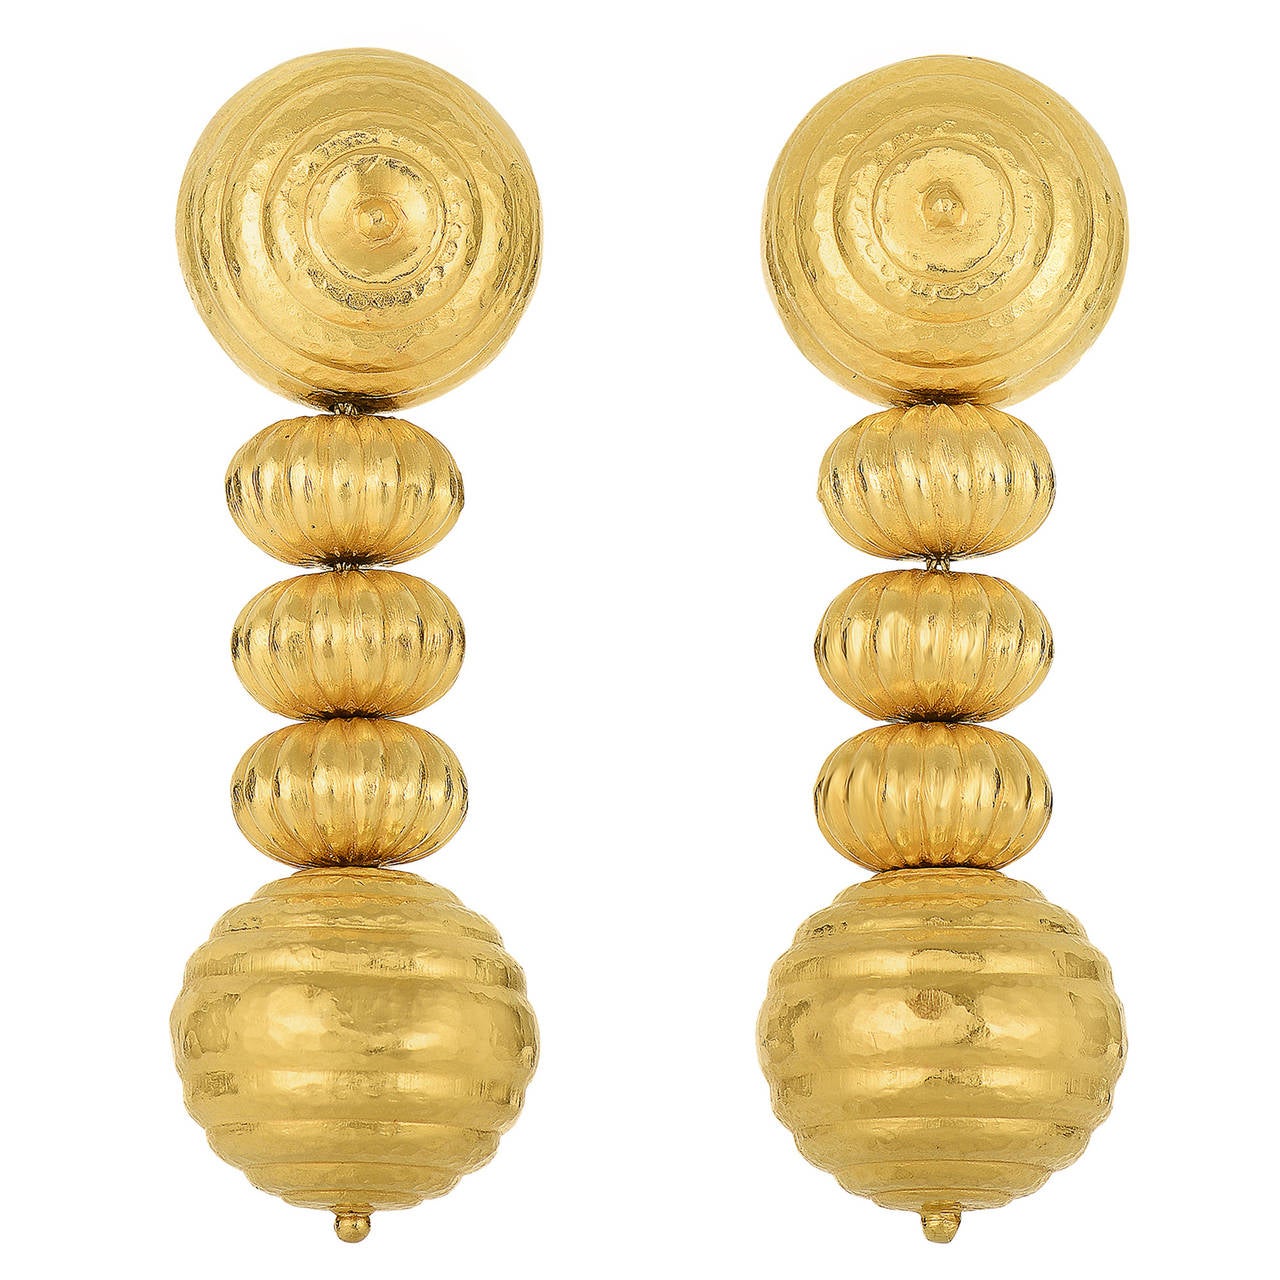 Lalaounis Minoan and Mycenaean Collection Gold Earrings For Sale